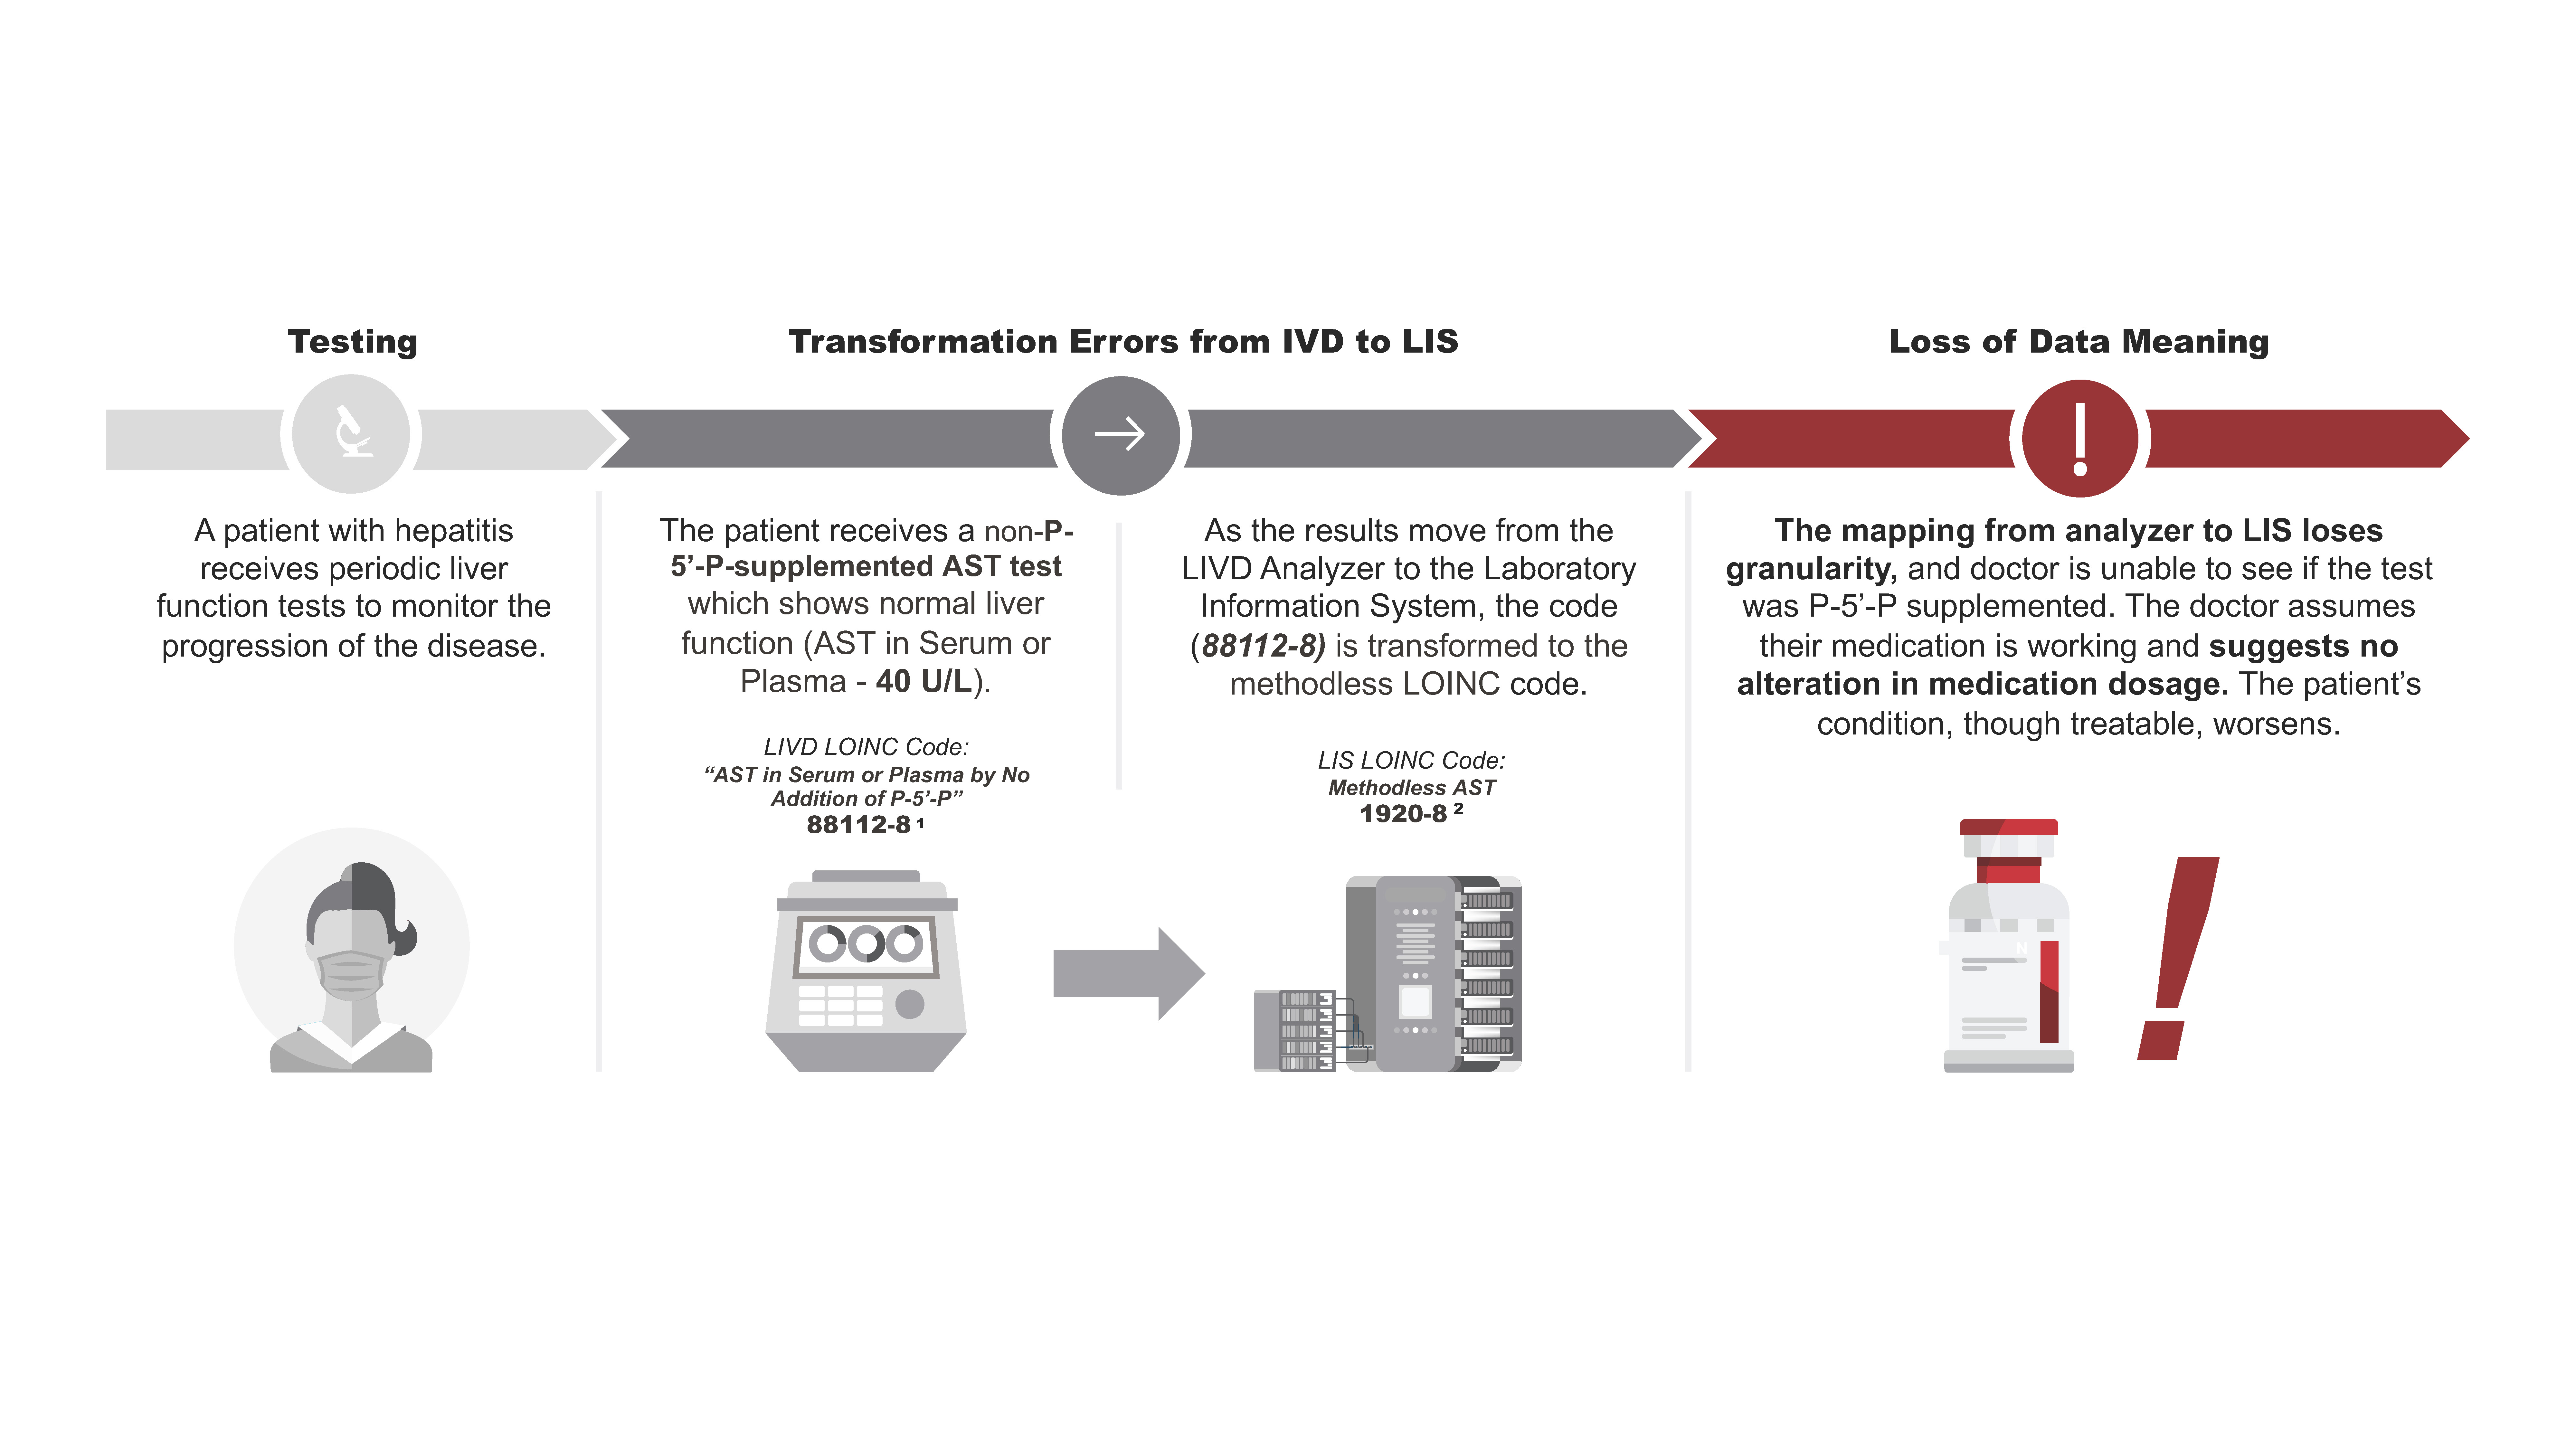 Infographic showing how transformation errors from in vitro diagnostics to Laboratory Information Systems following patient testing can results in loss of data meaning.